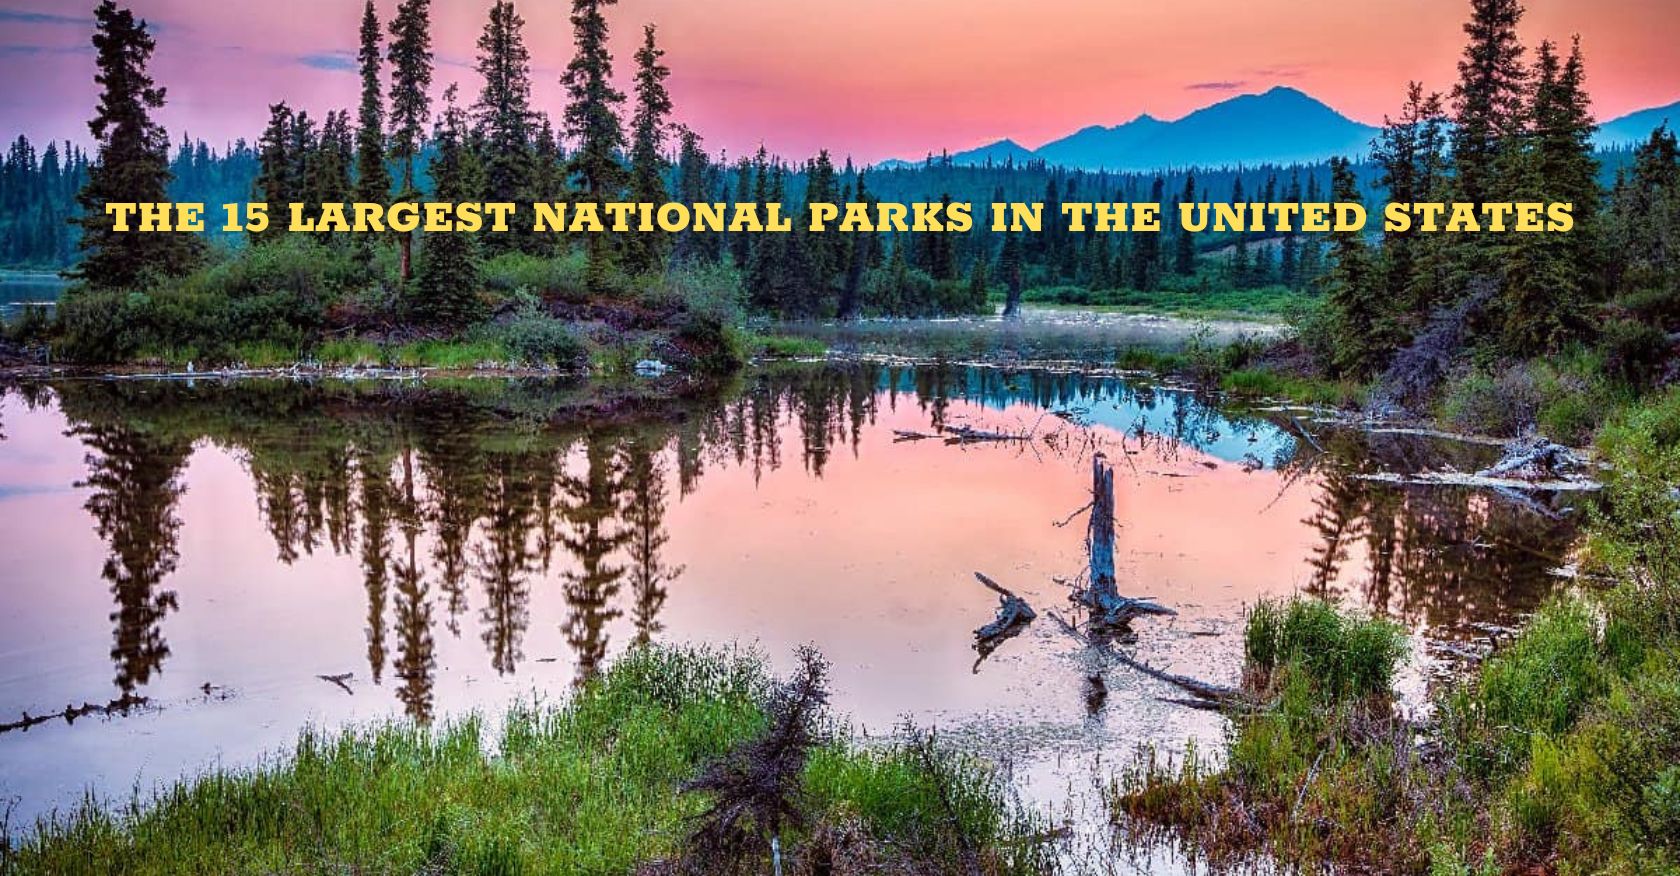  THE 15 LARGEST NATIONAL PARKS IN THE UNITED STATES